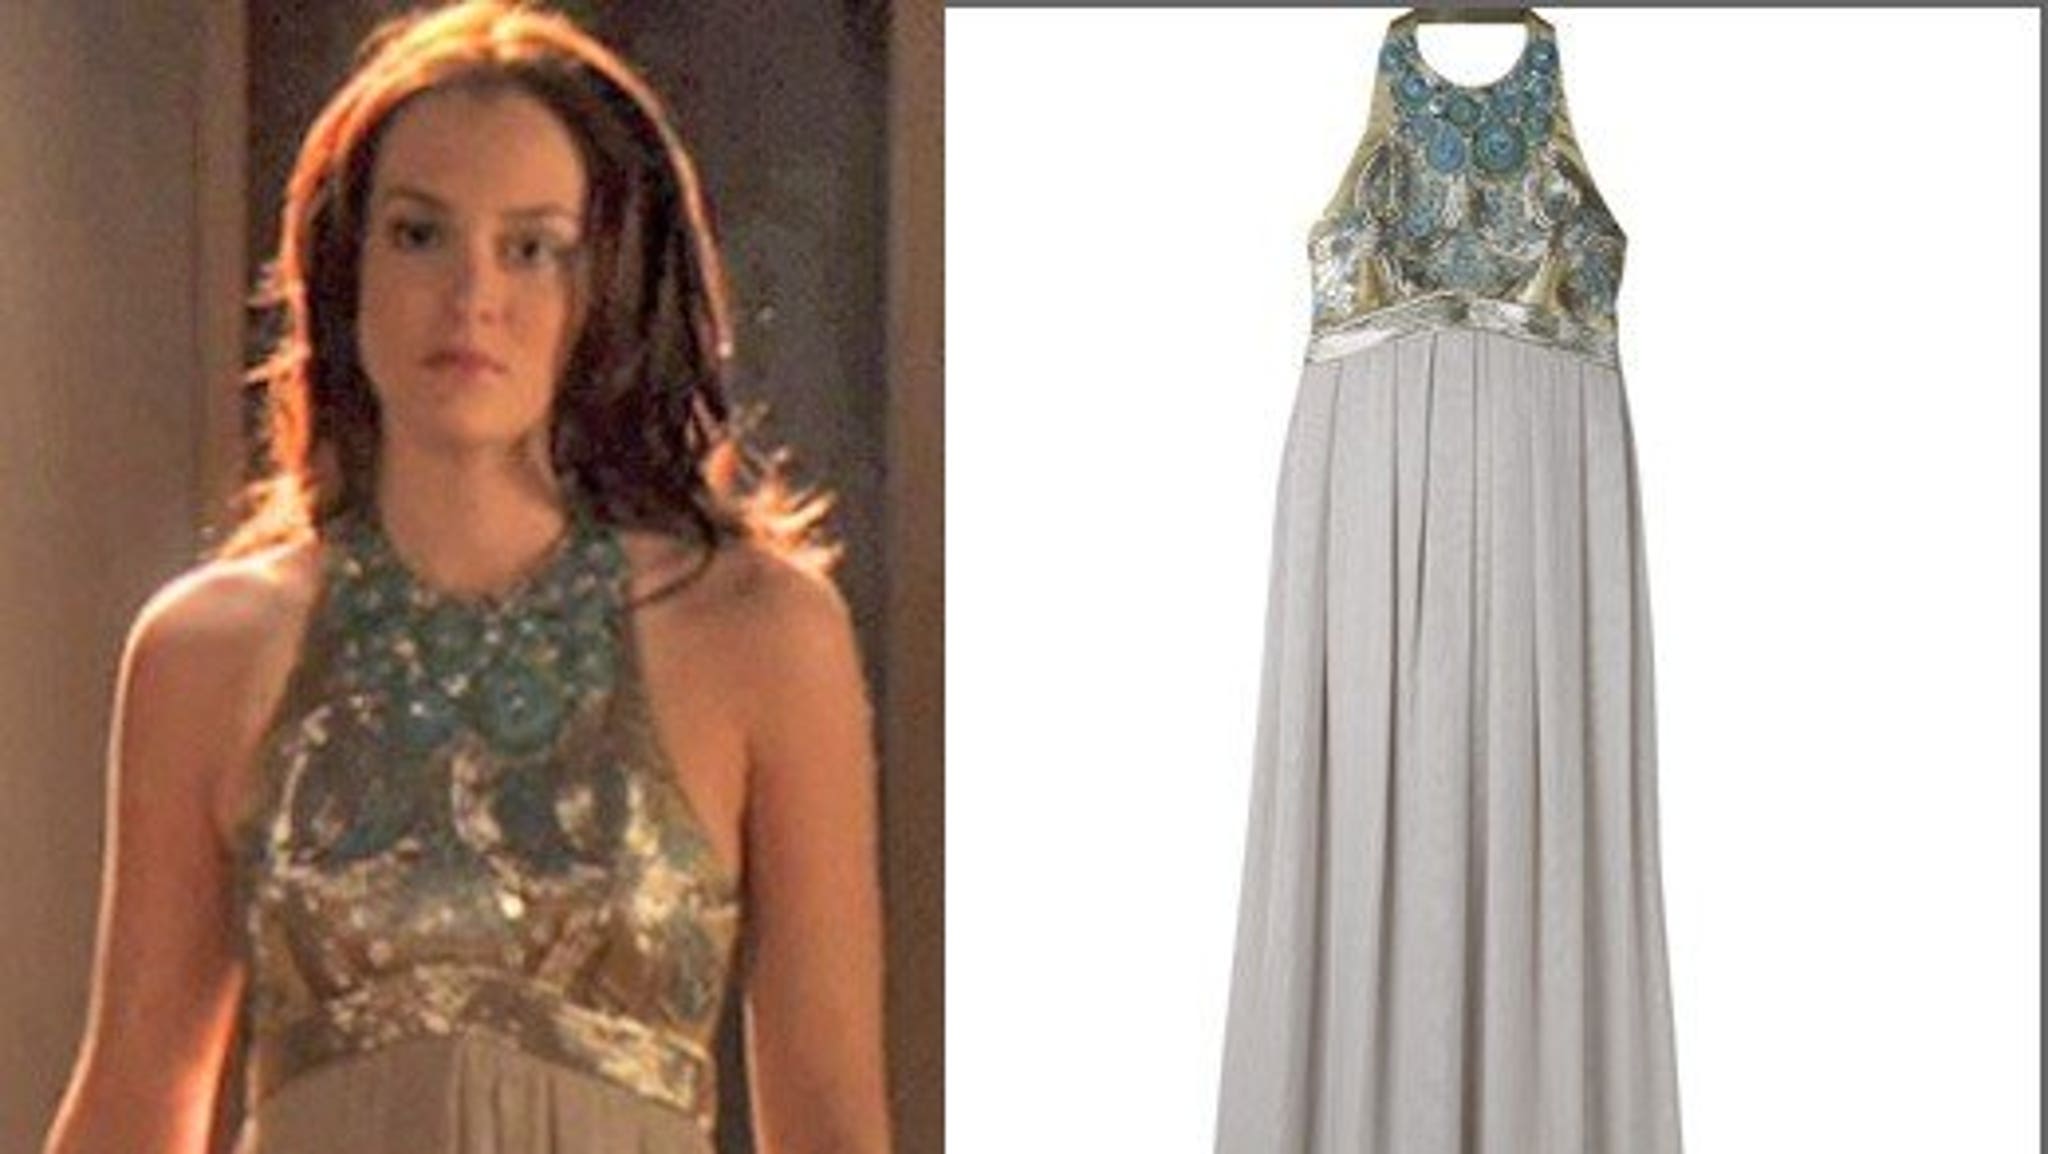 Gossip Girl S Indecent Dress How Much It Cost